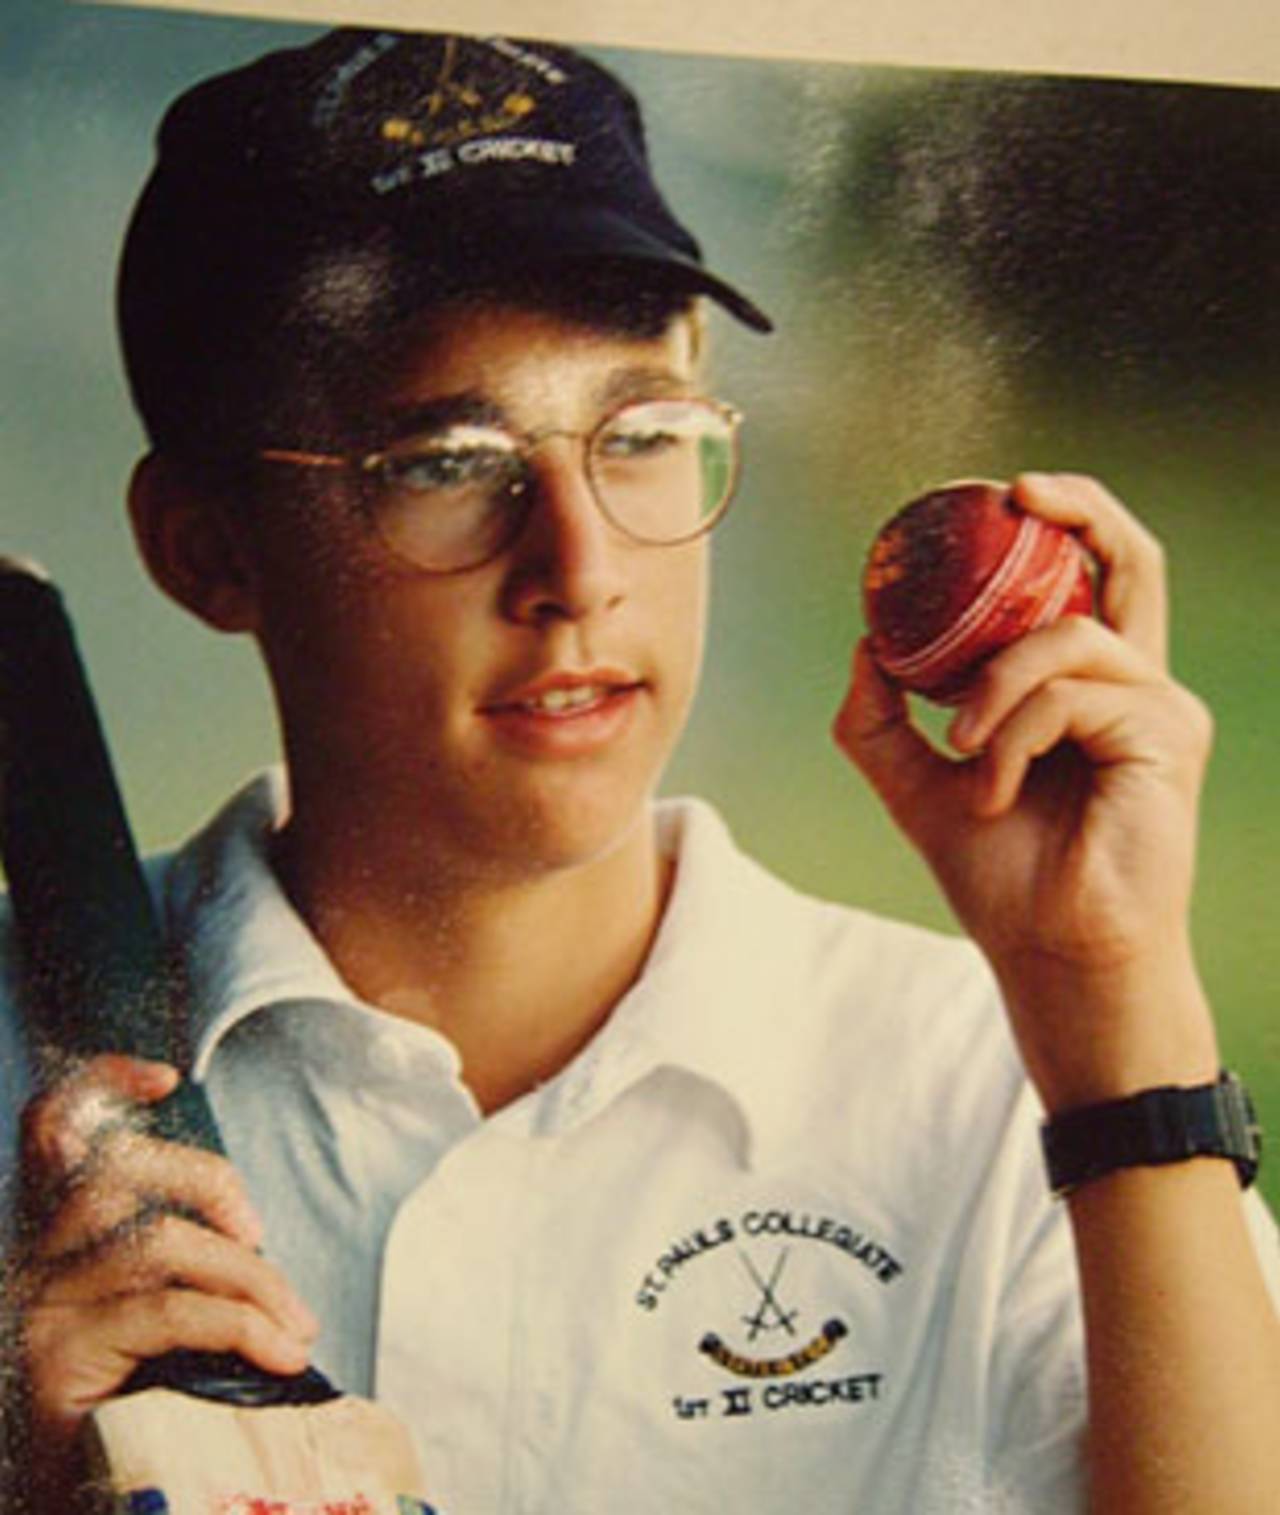 The Harry Potter years: a photograph of a young Daniel Vettori from his father's scrapbook